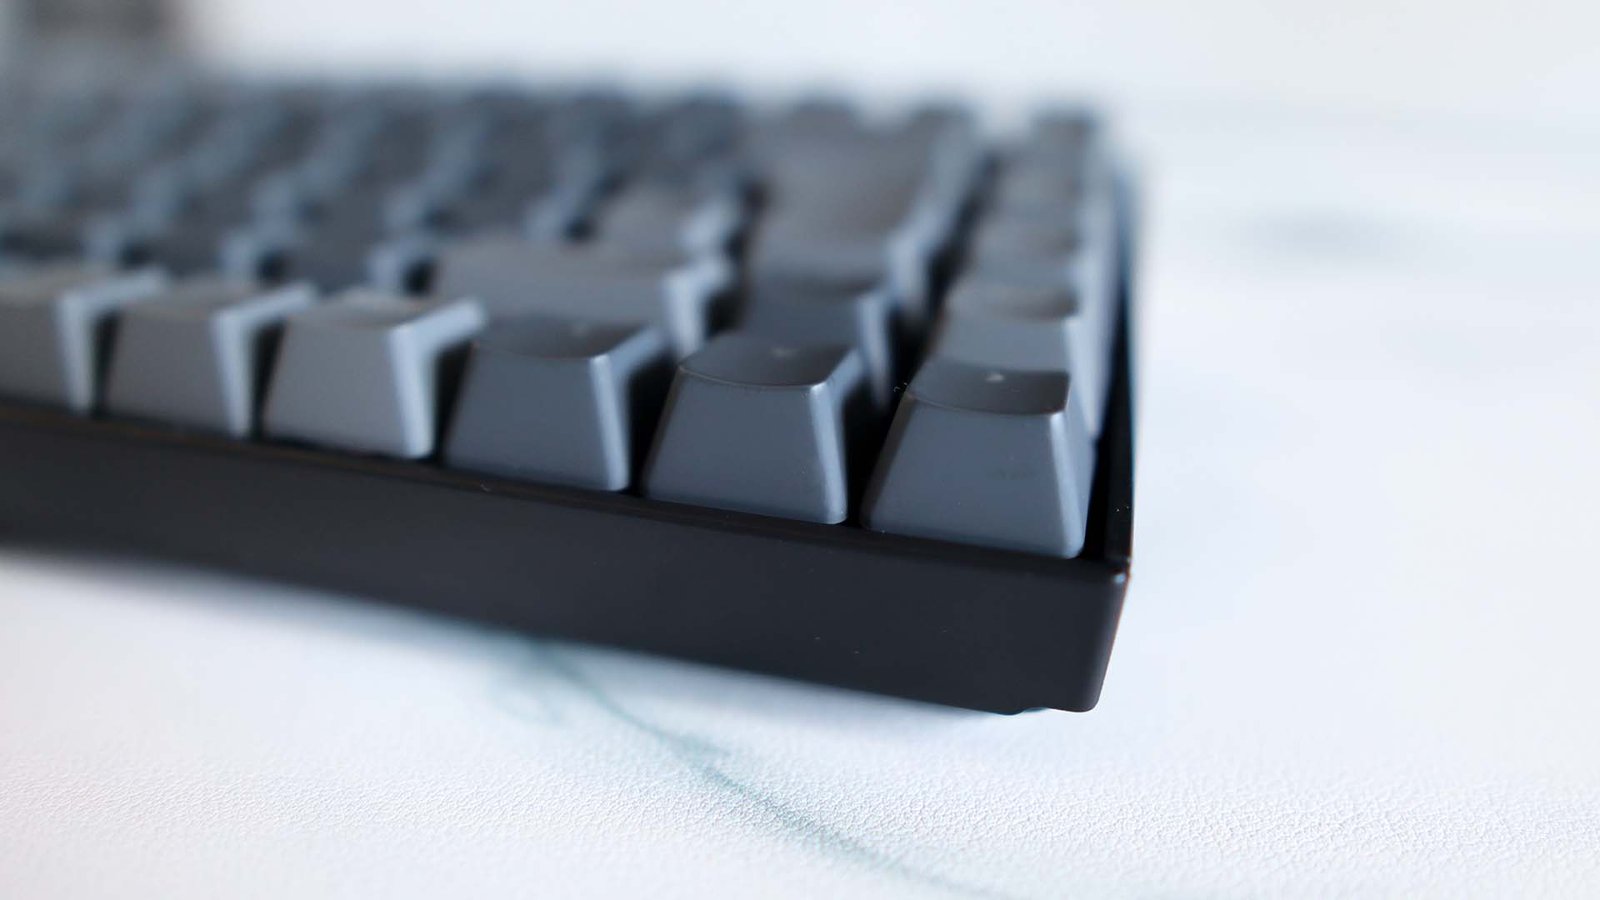 Keychron K2 gaming keyboard pictured on a desk